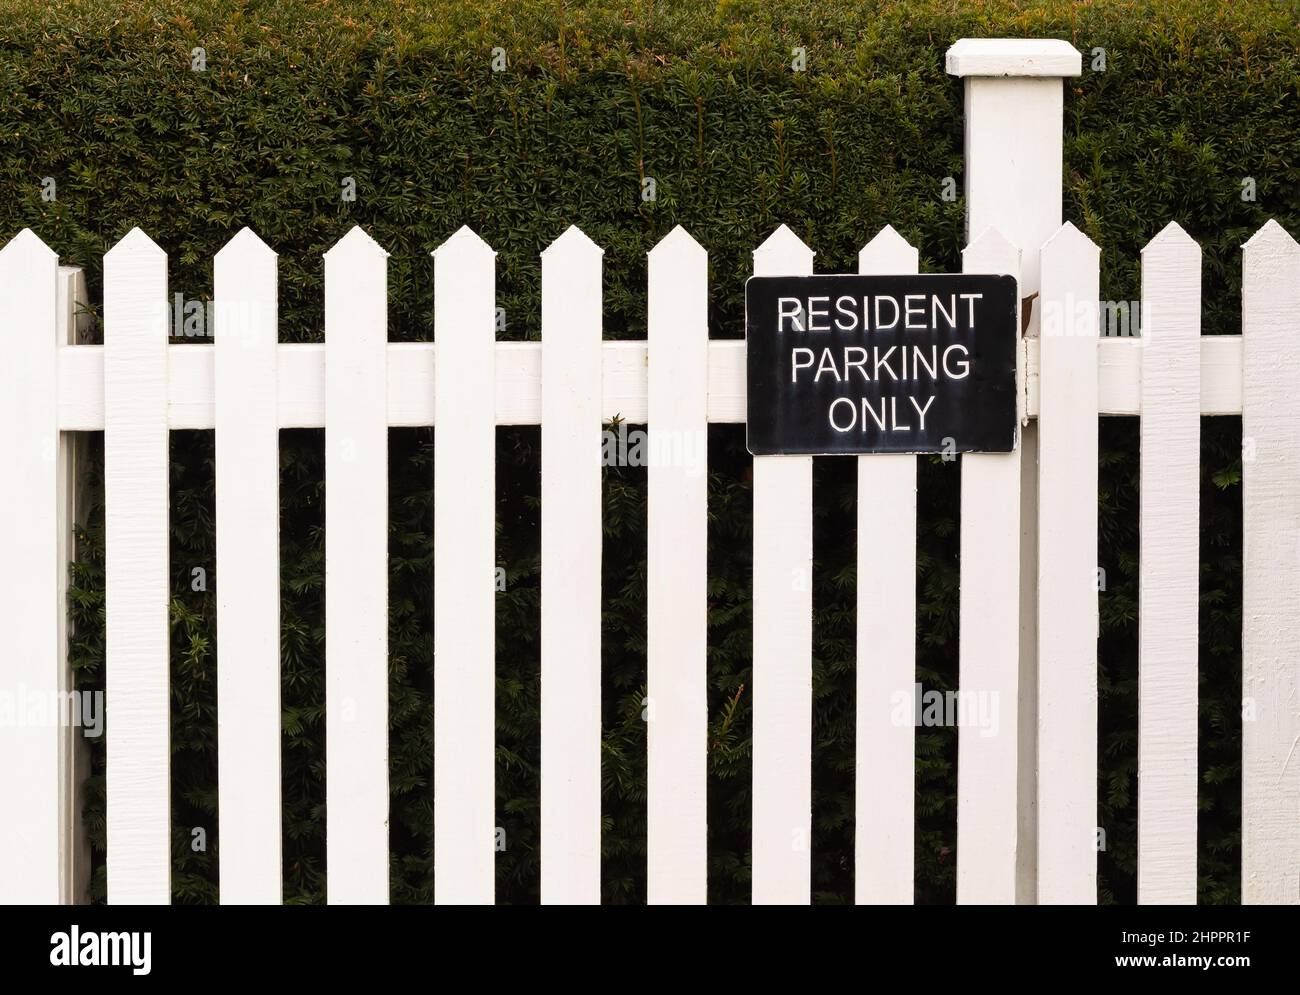 Parking for residents only sign on a white wooden fence Stock Photo